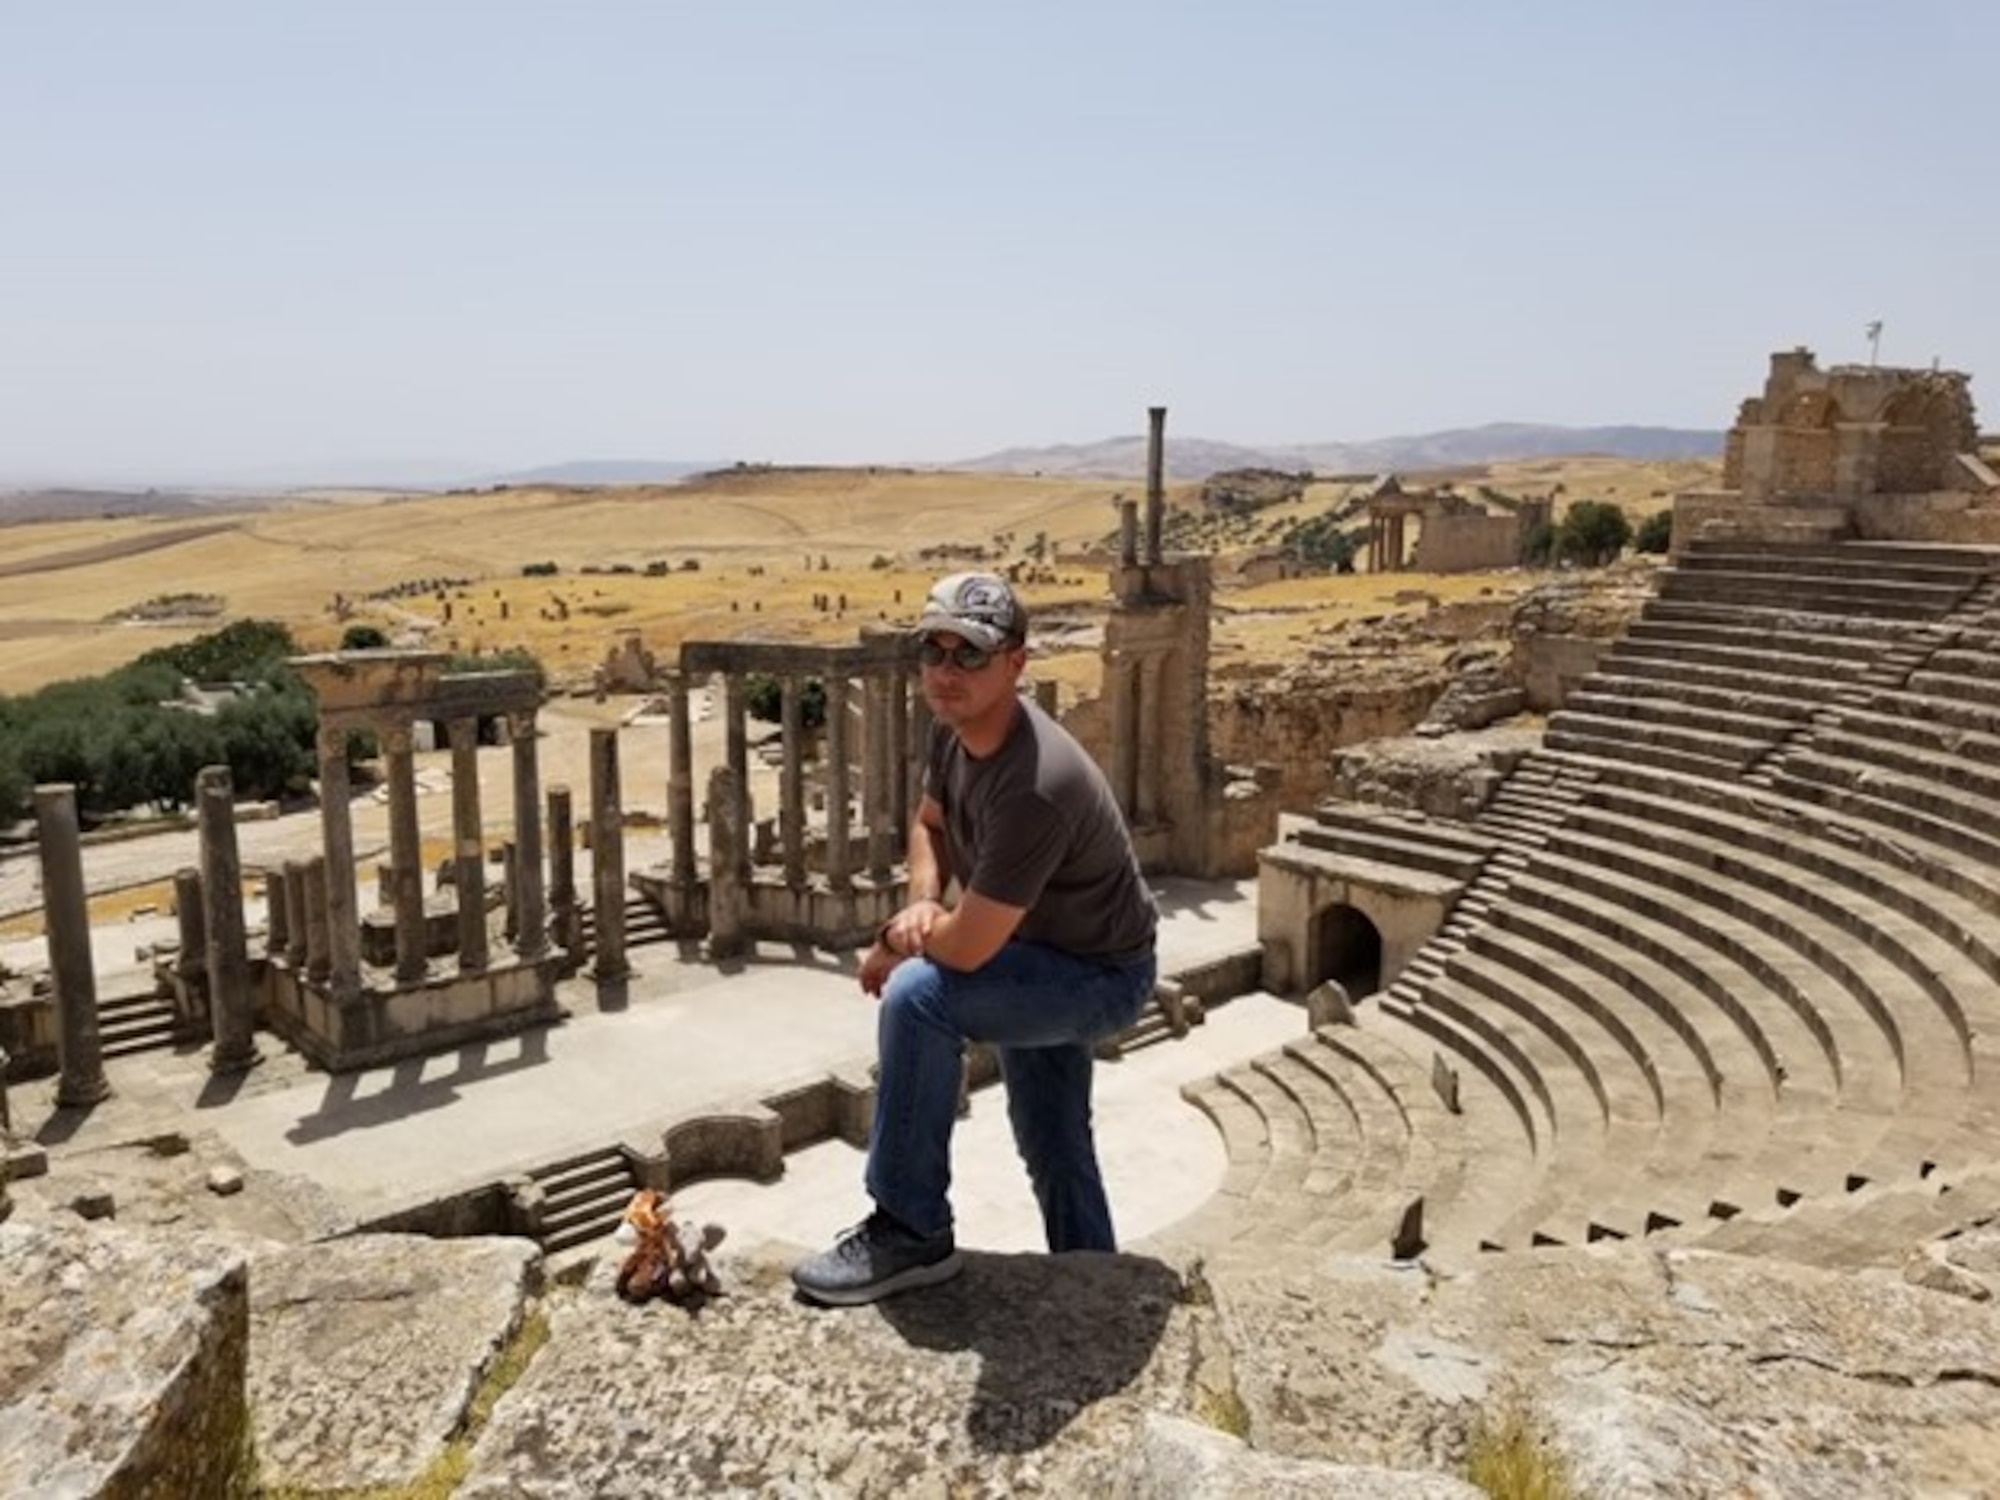 French Language Enabled Airman Program Scholar Maj. Darrell Moyers visited Roman ruins during a deployment in AFRICOM.